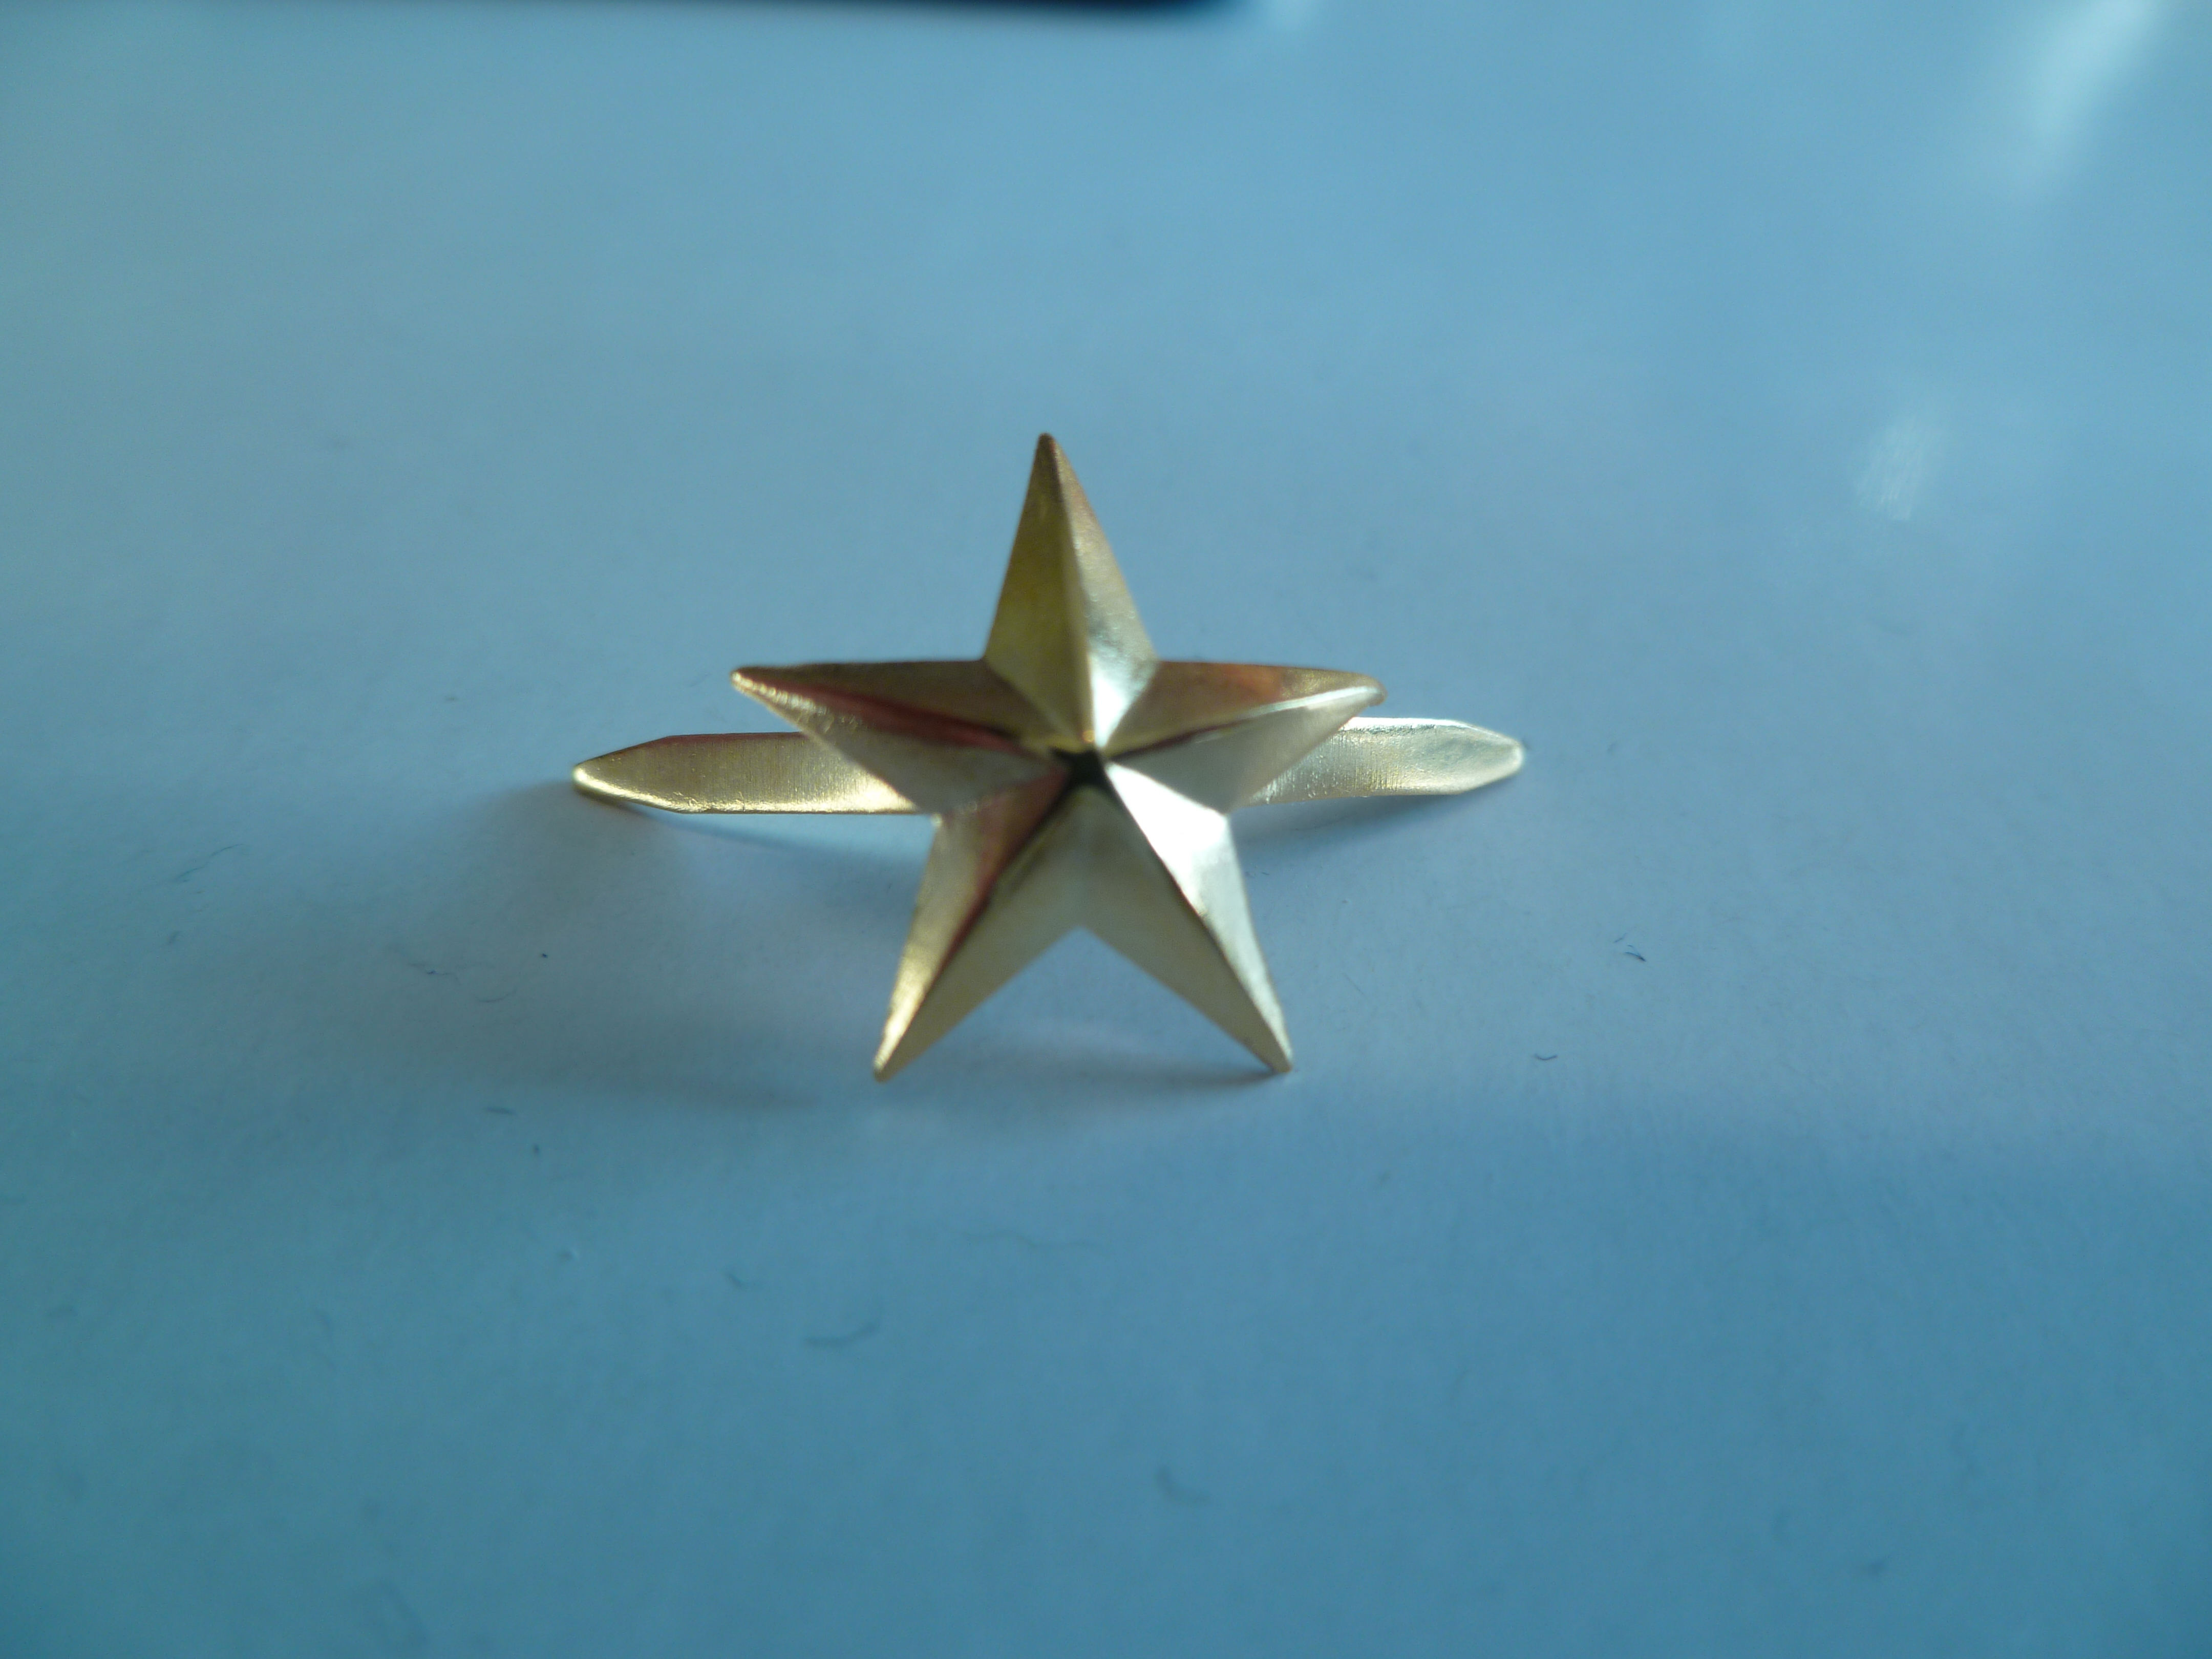 Metal star "higher patent" (the pair)